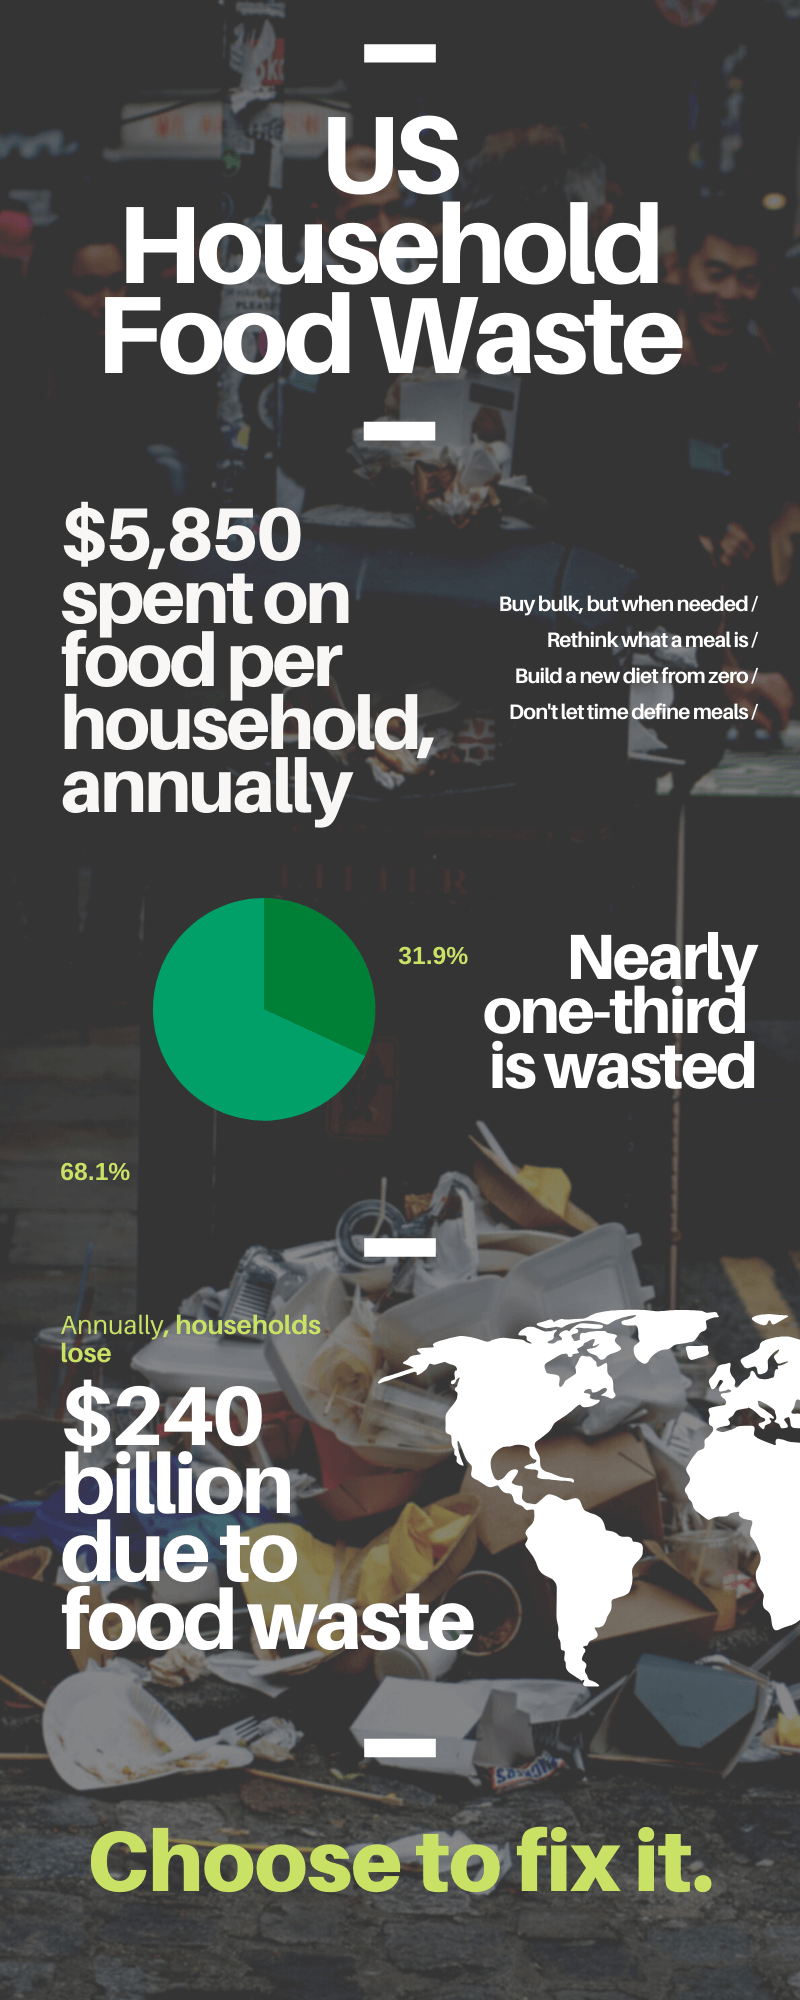 US Households waste approximately 1/3 of their food, learn how to reduce it